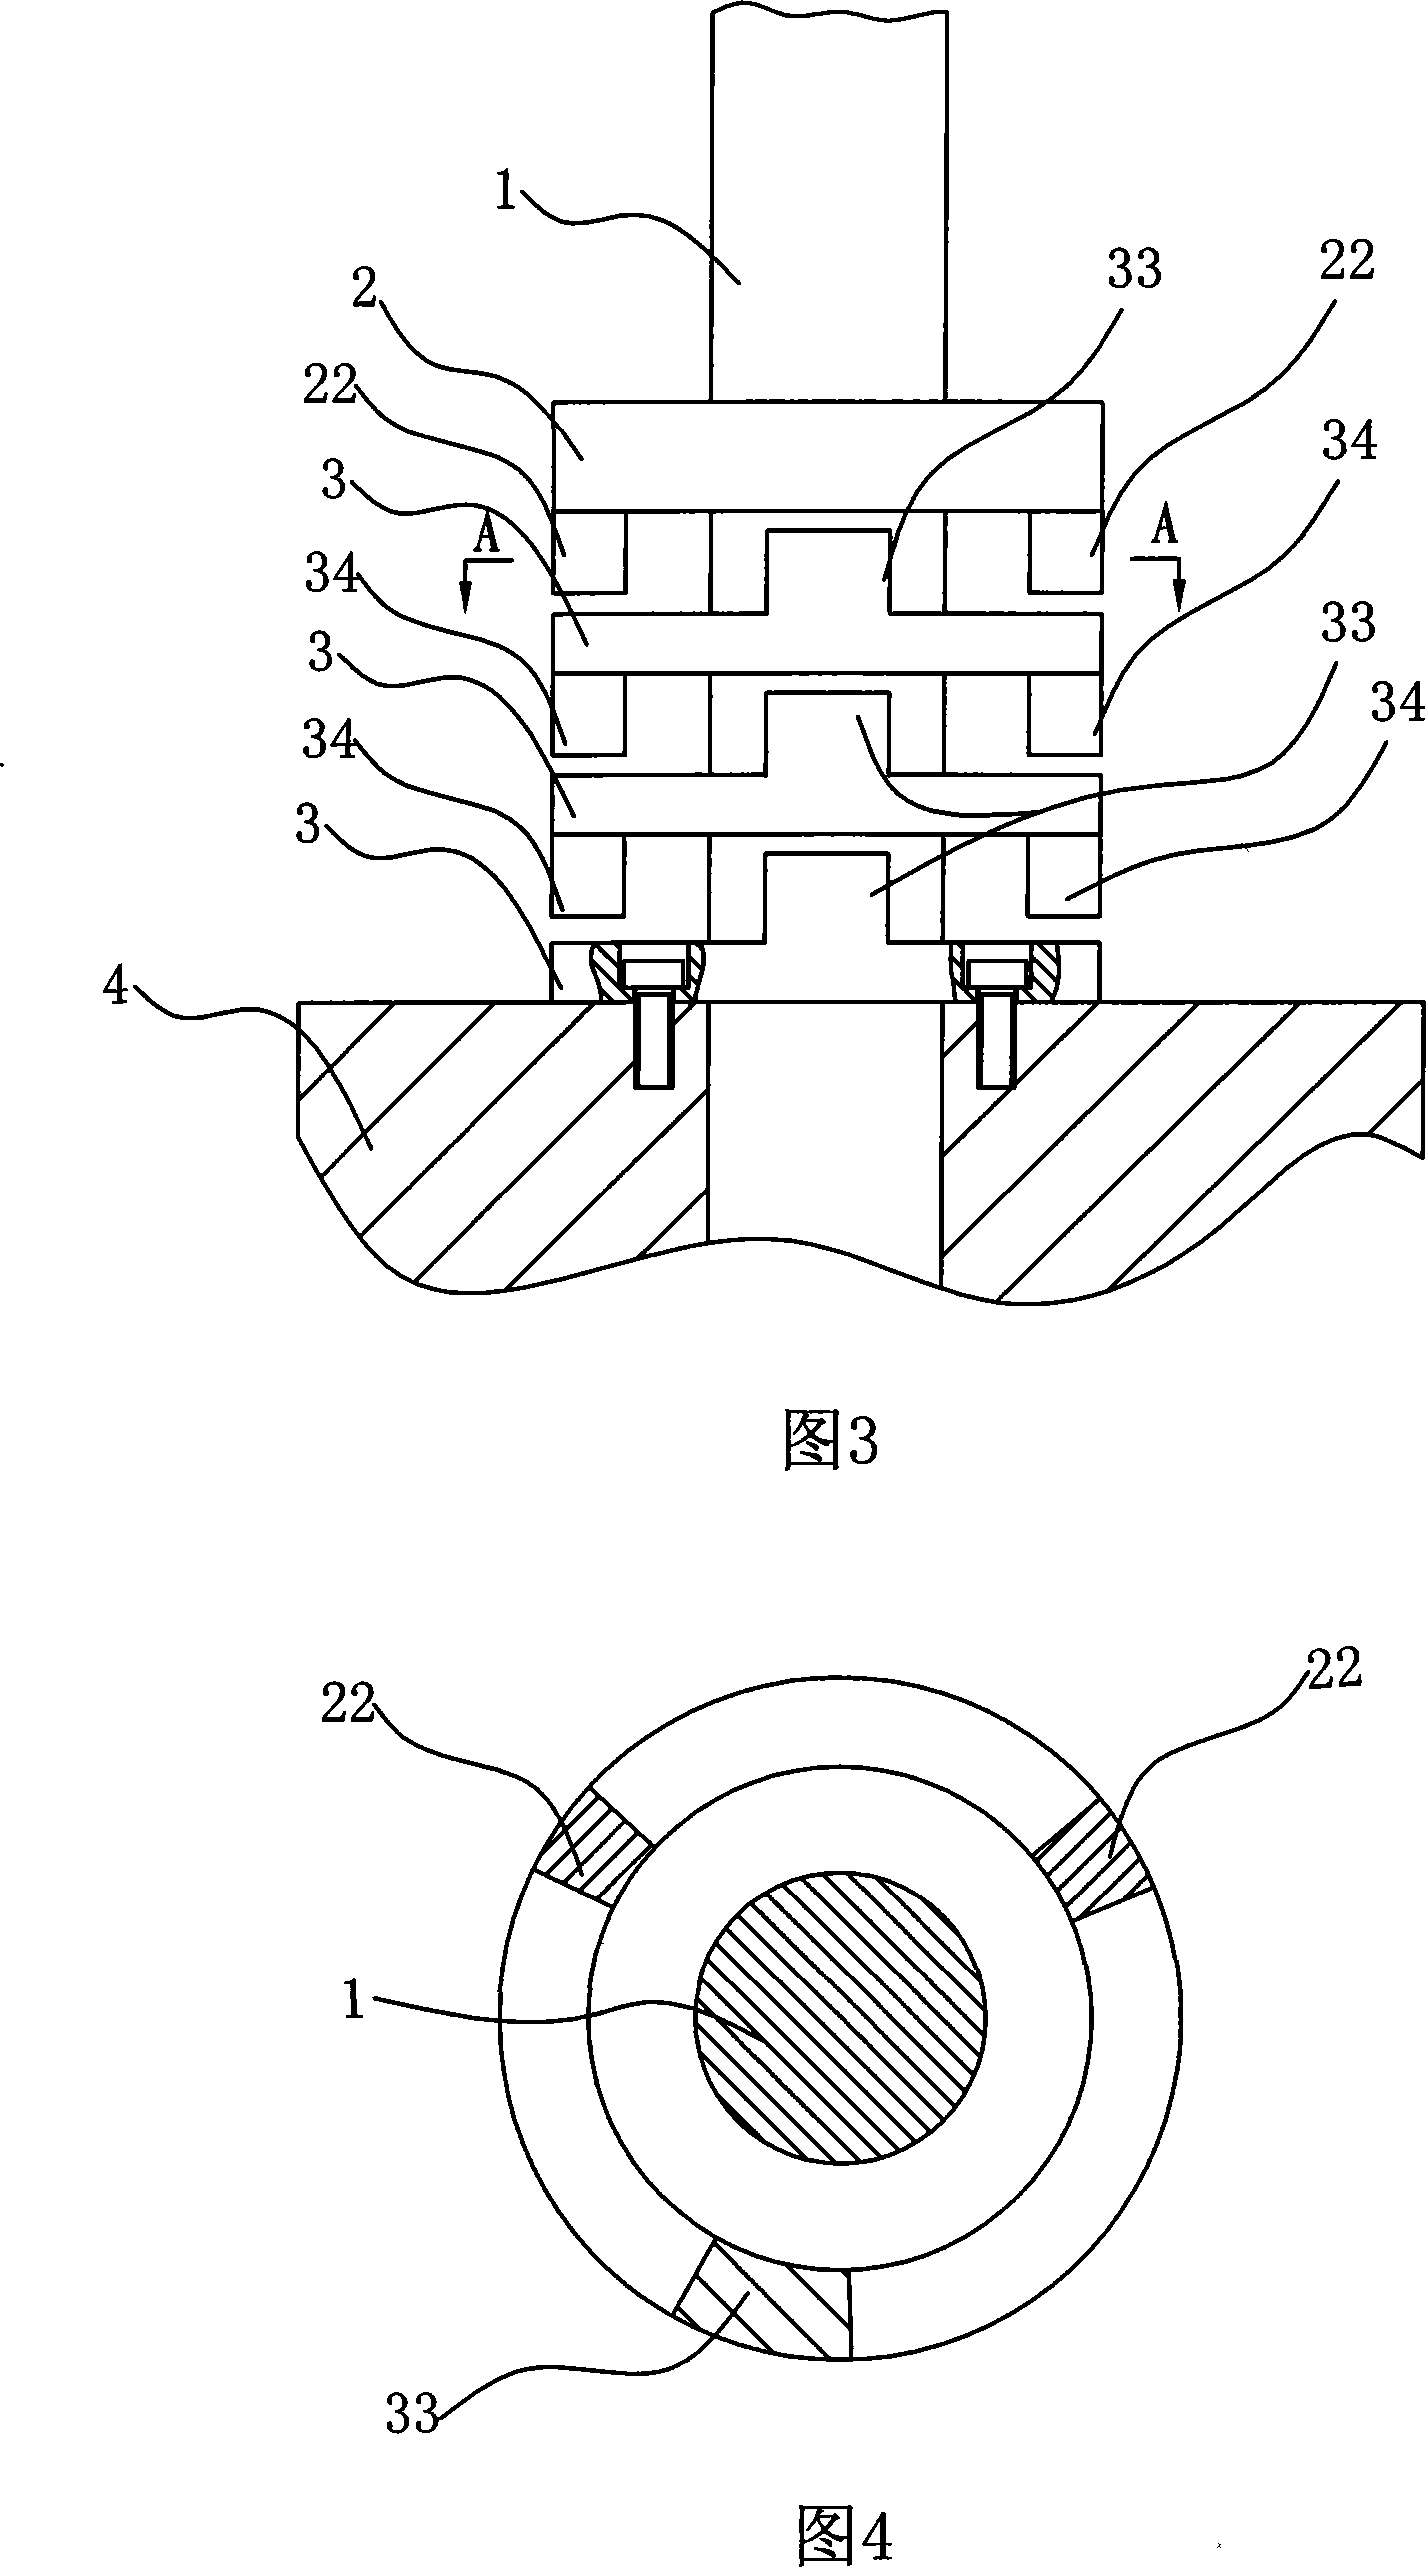 Coaxial superimposed multiple layer arbitrary angle rotary caging device